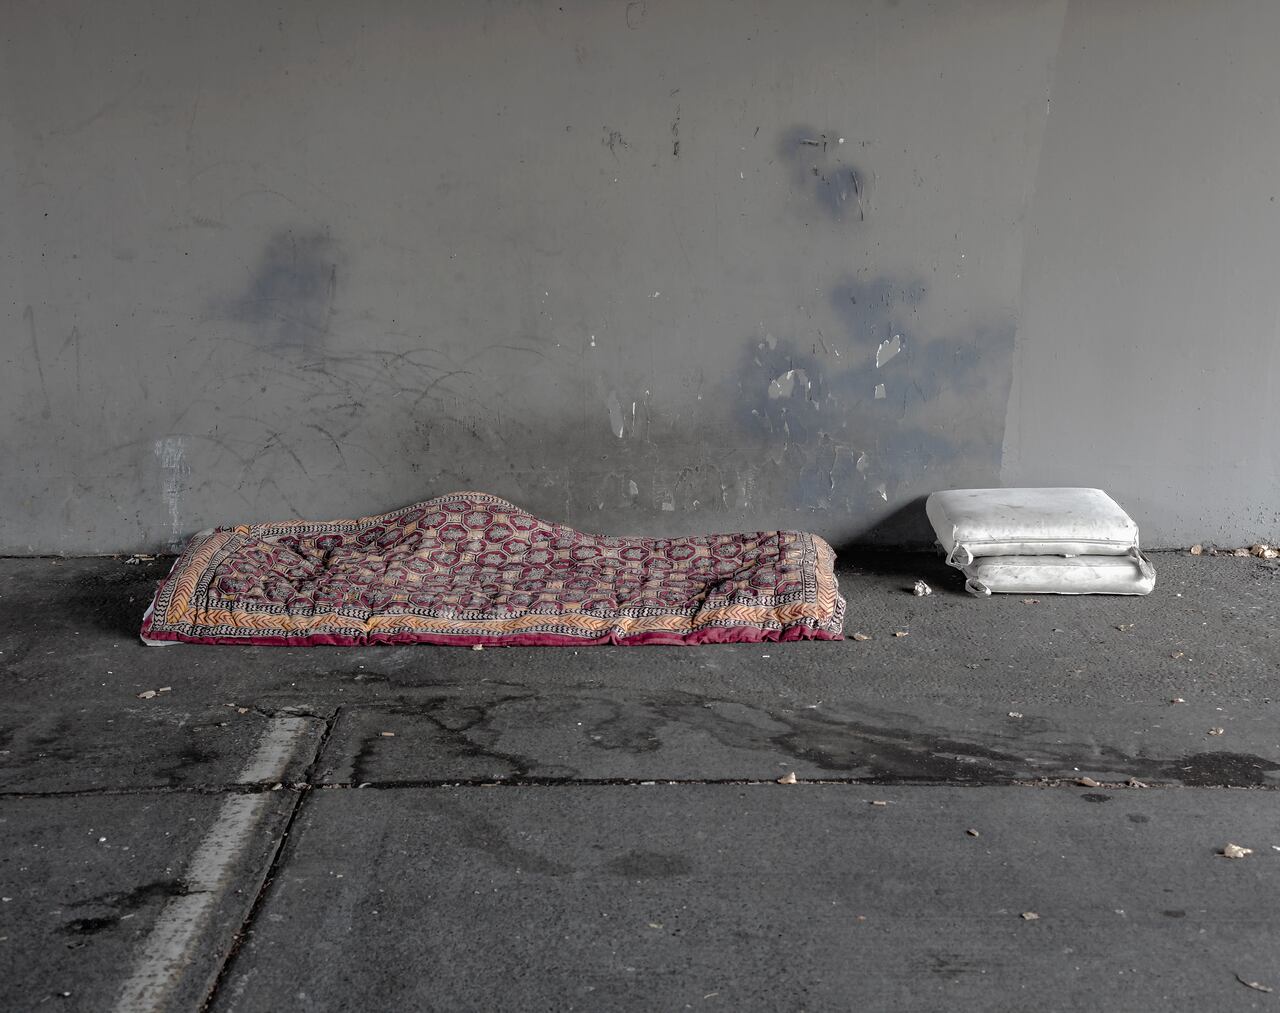 homeless person's bed and pillows under bridge